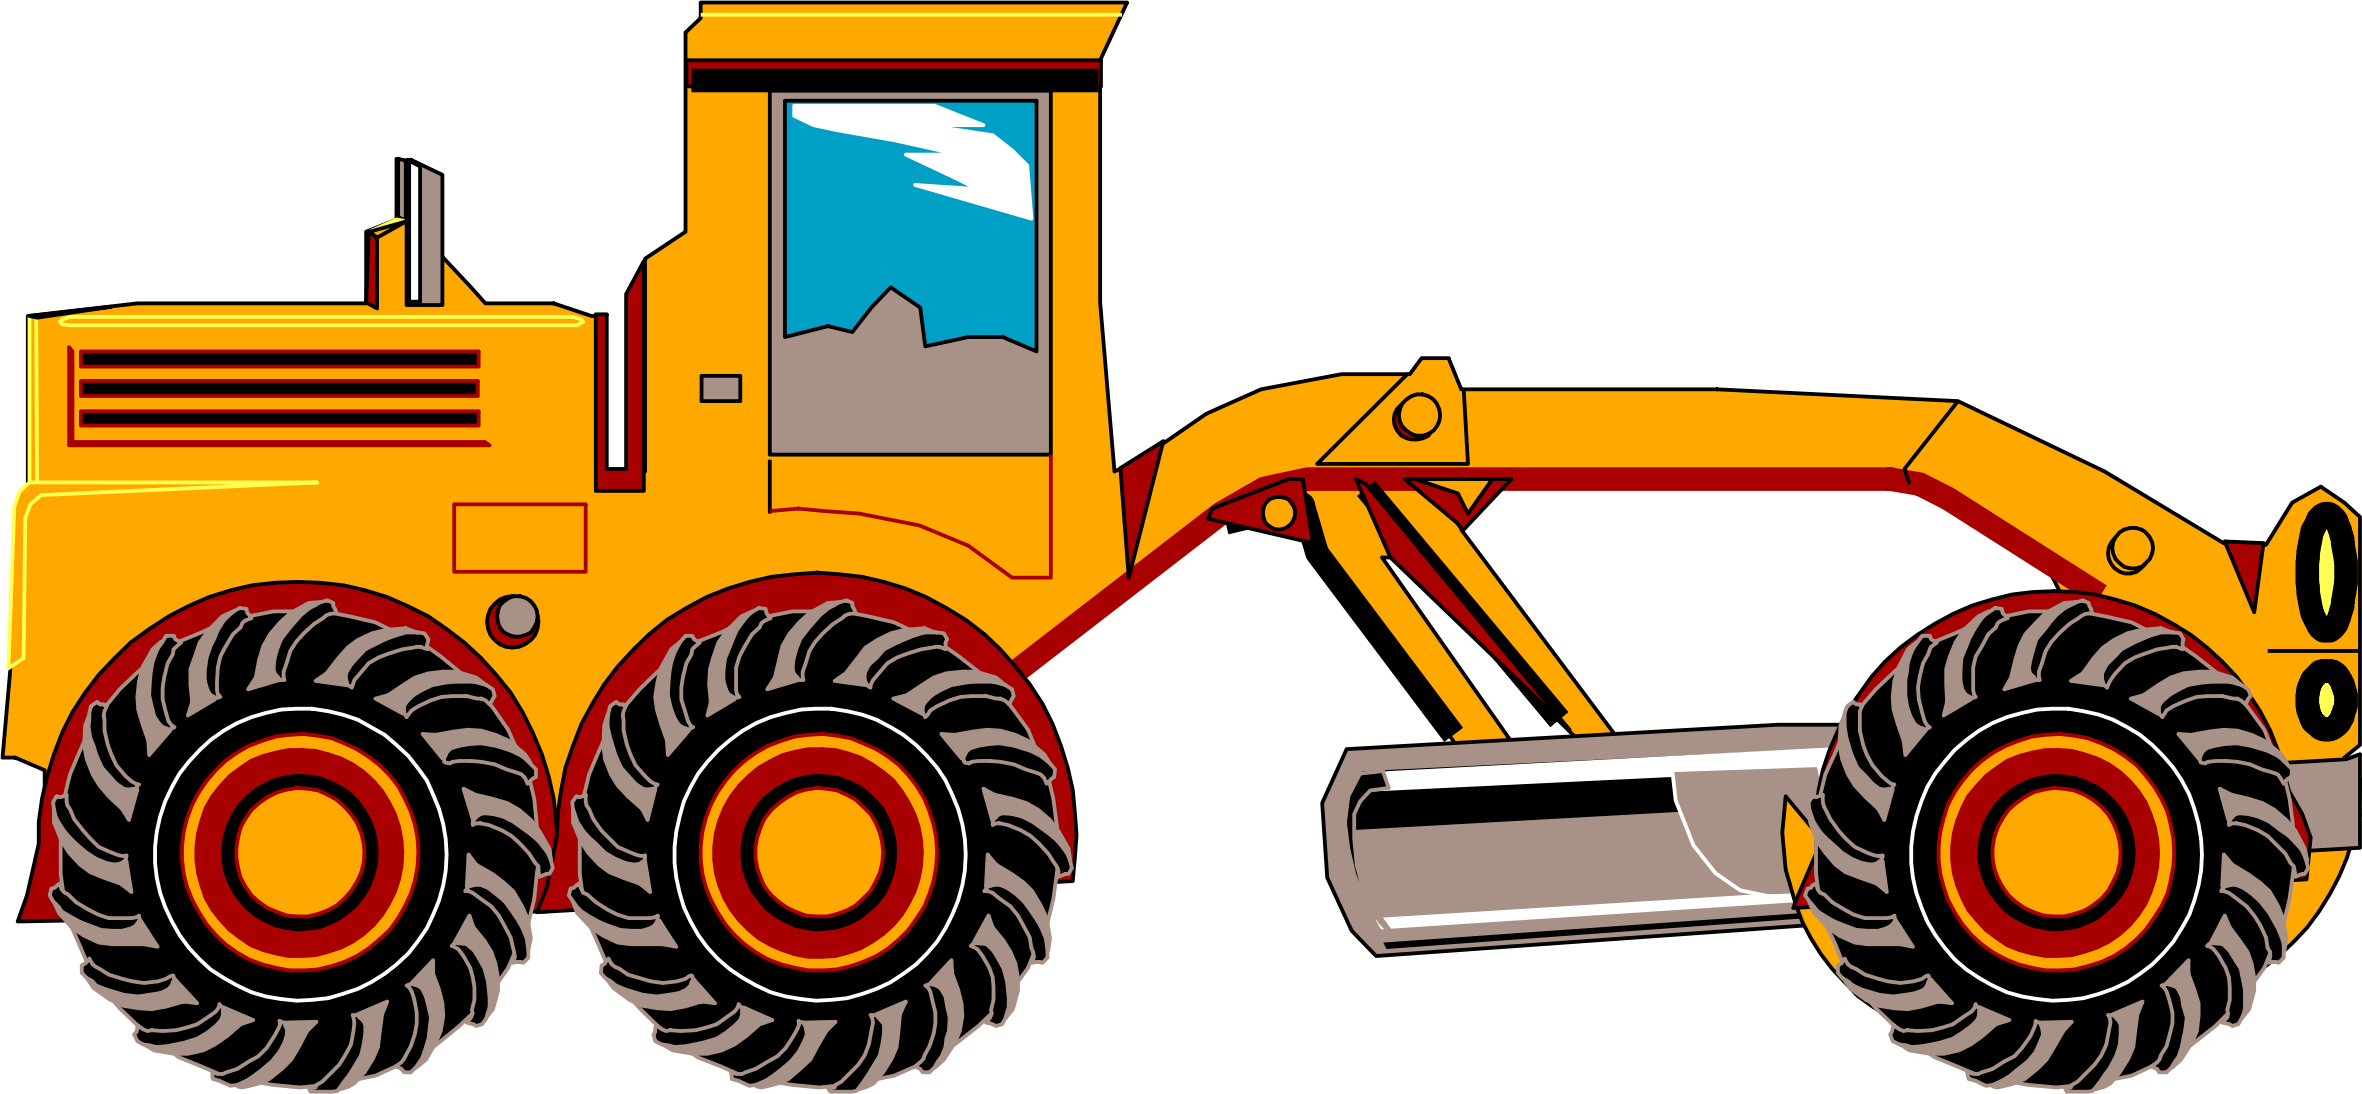 construction clipart tractor